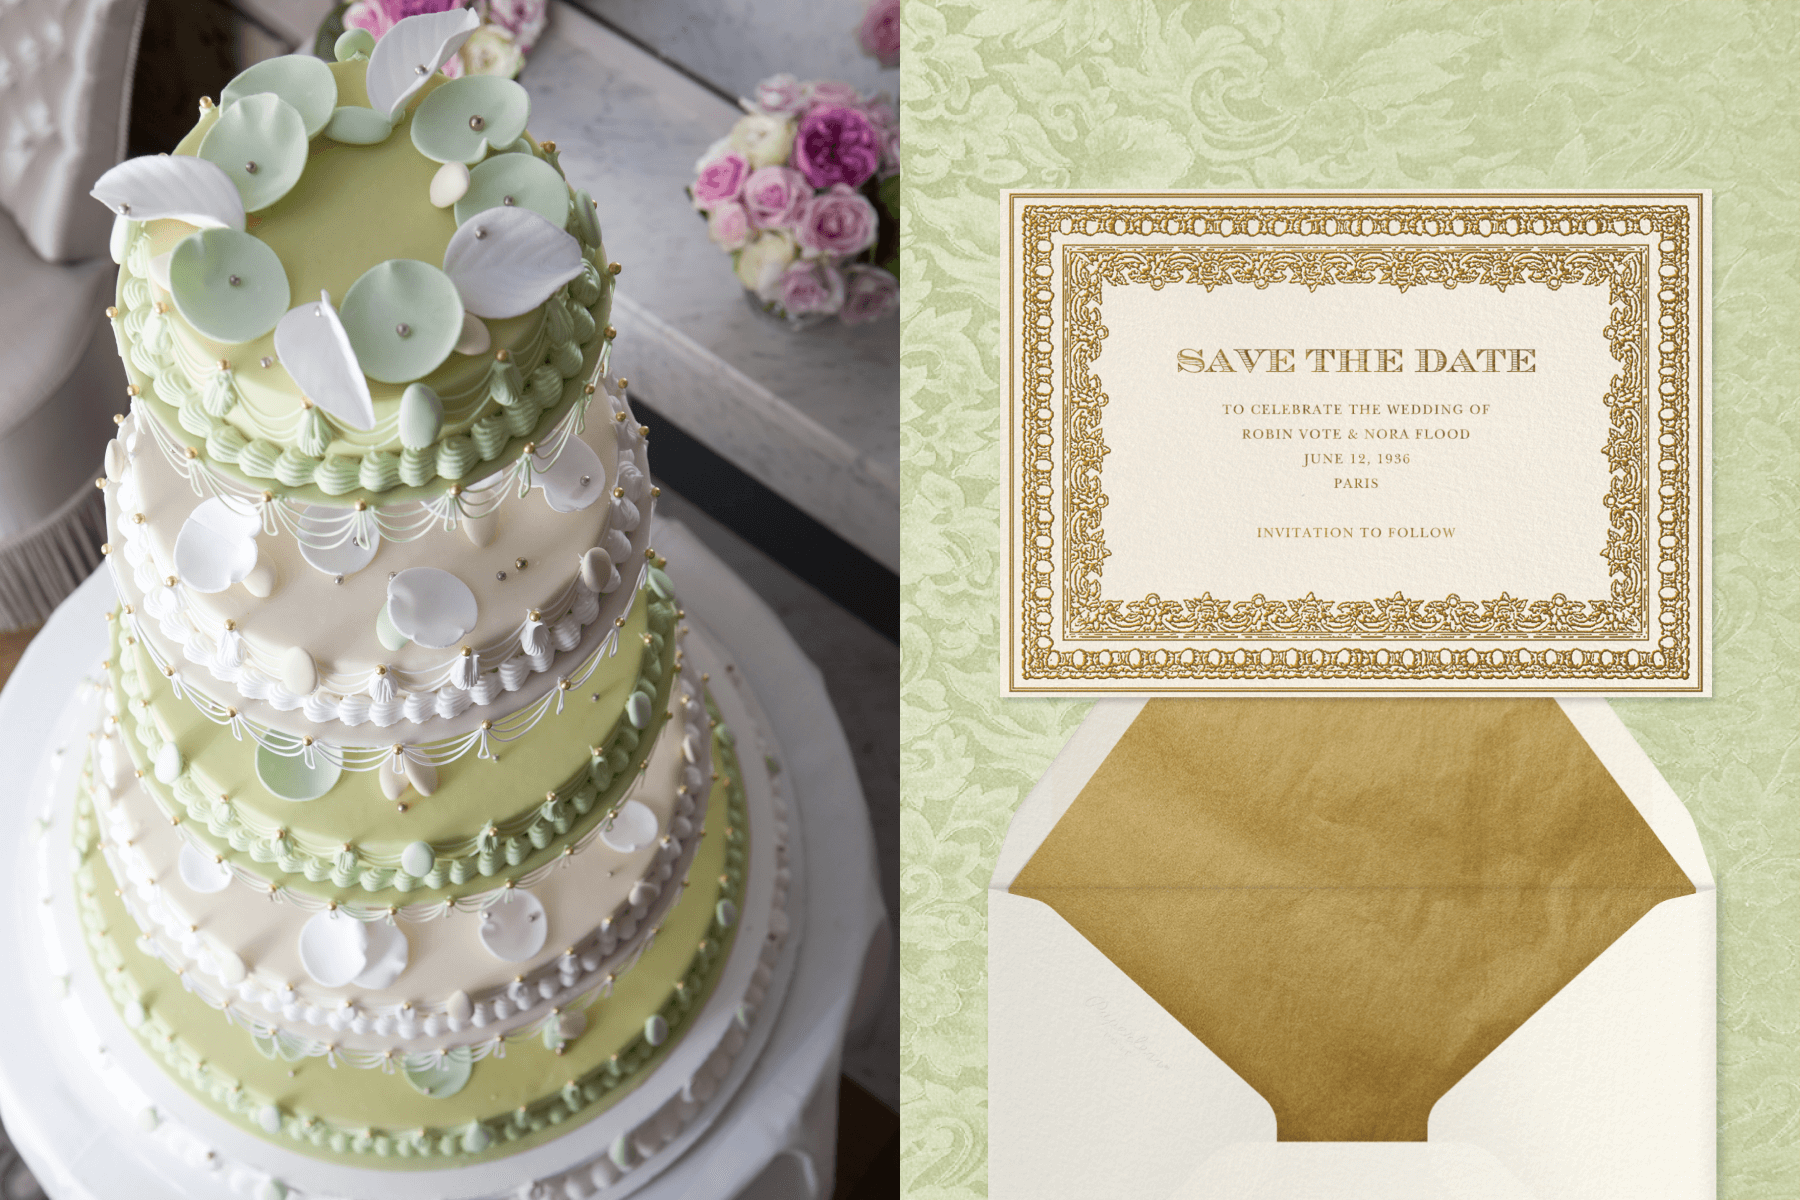 Left: A green and white multi-tiered wedding cake; Right: A Laduree save the date card that is cream colored with gold details. 